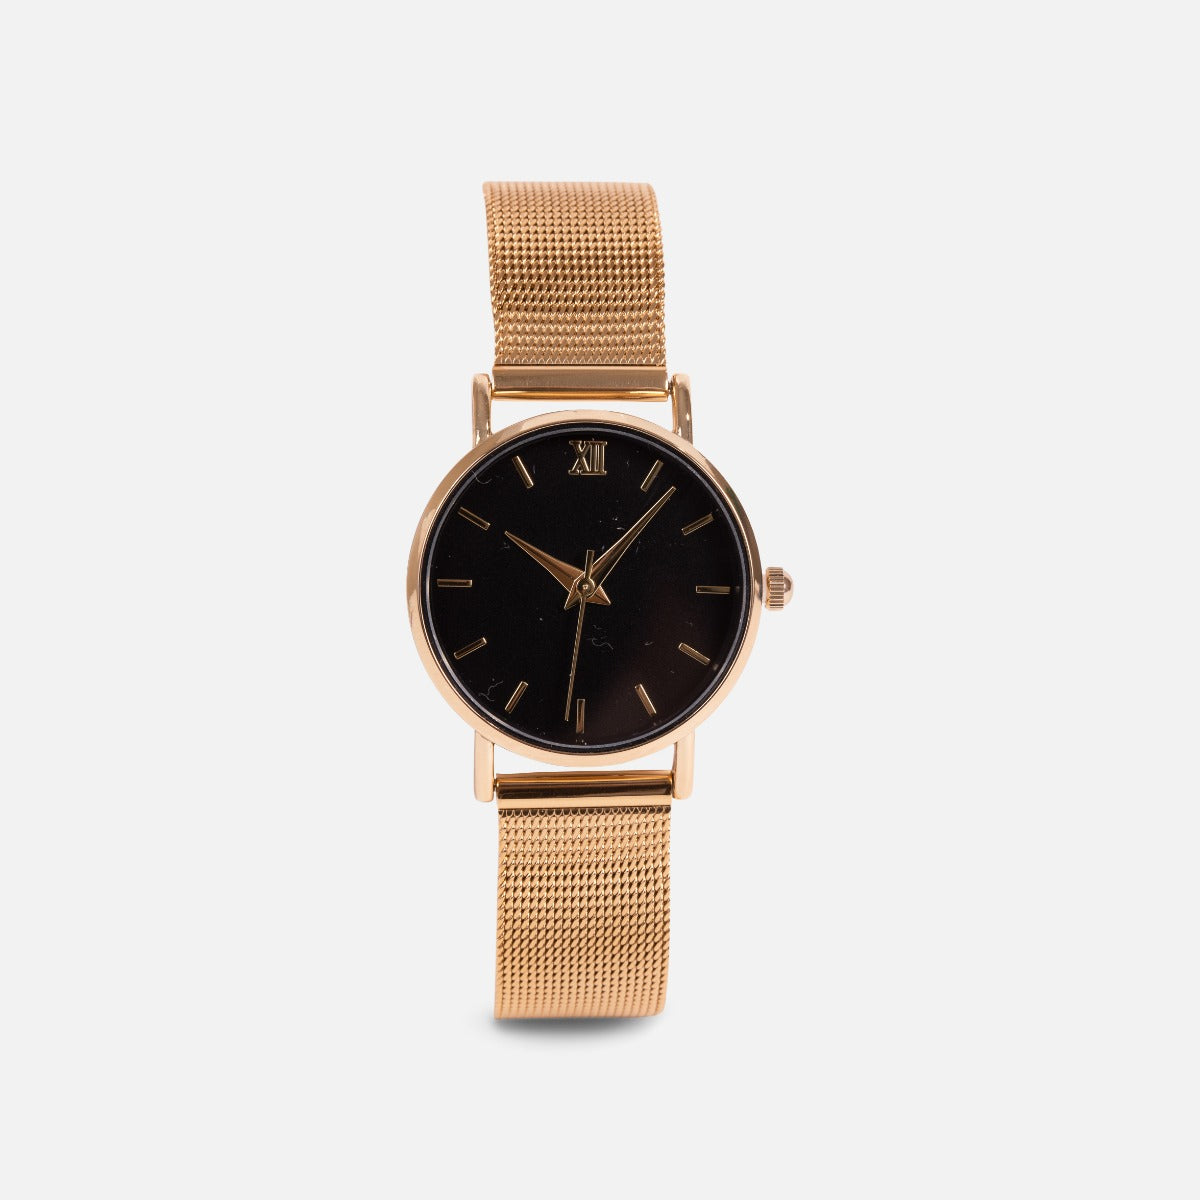 Minima collection - gold mesh bracelet watch with circular black dial